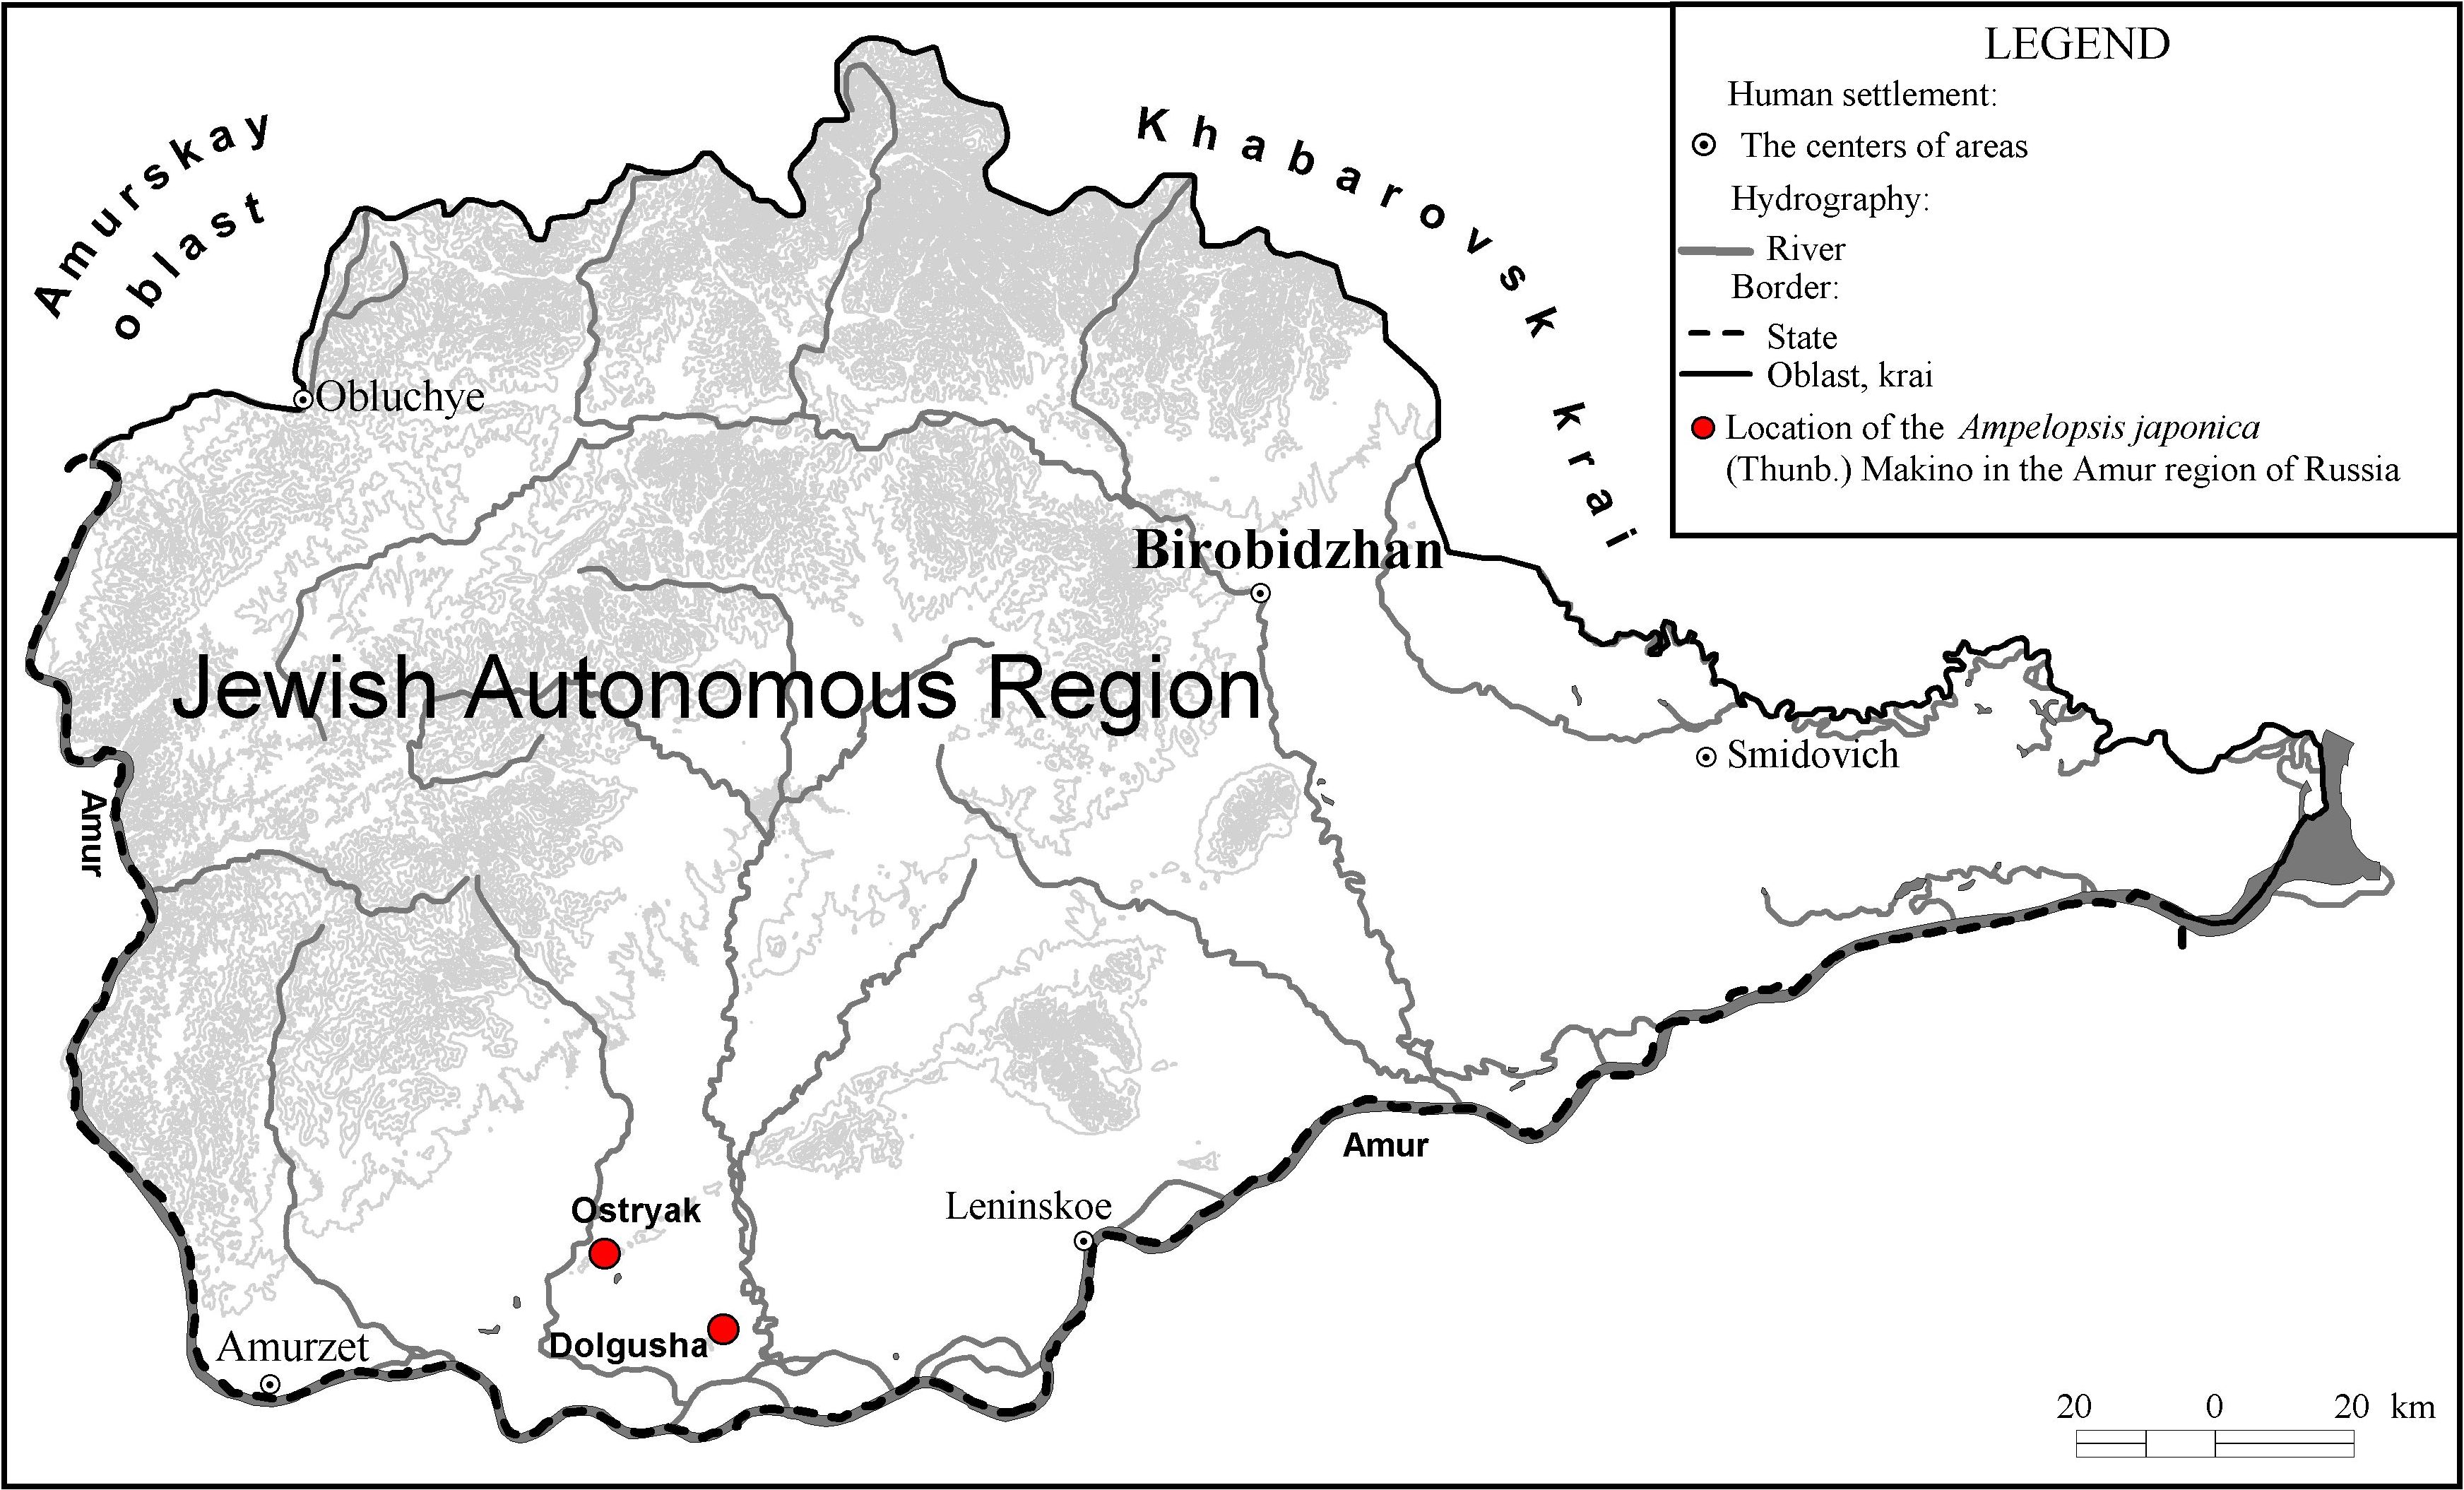 Location of Ampelopsis japonica in the Russian Amur region.